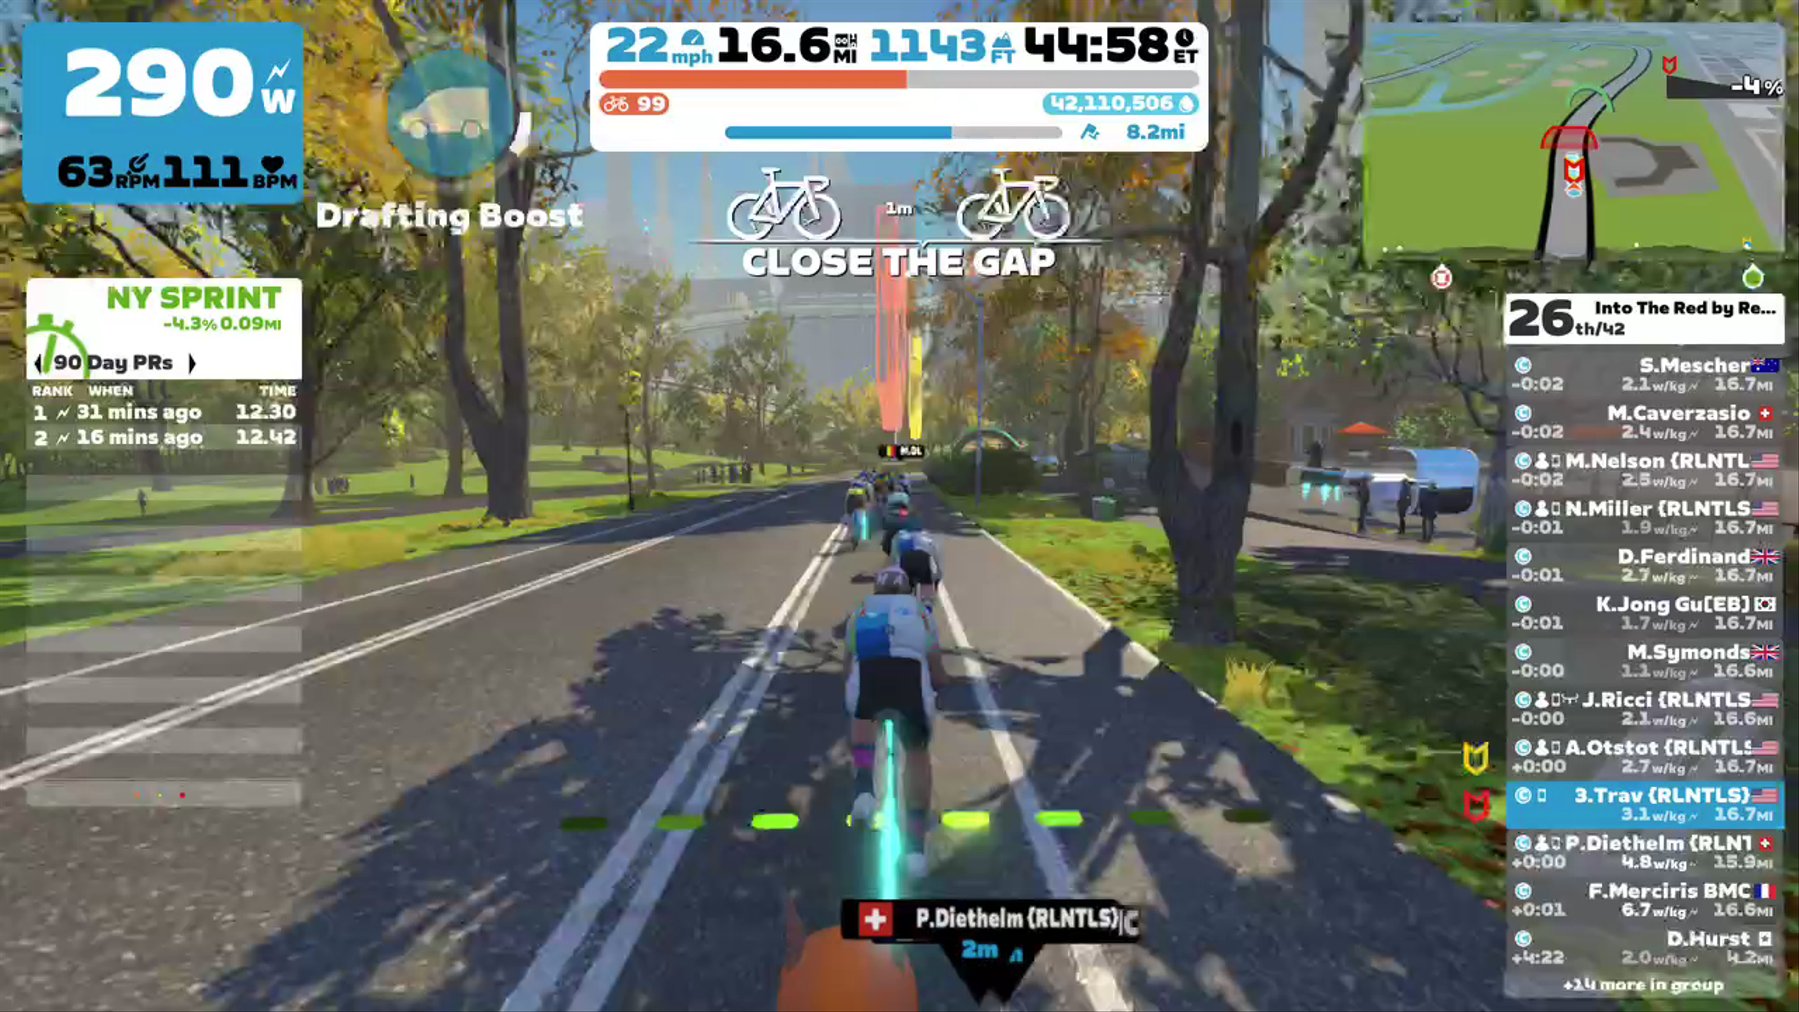 Zwift - Group Ride: Into The Red by Relentless (C) on Park Perimeter Loop in New York